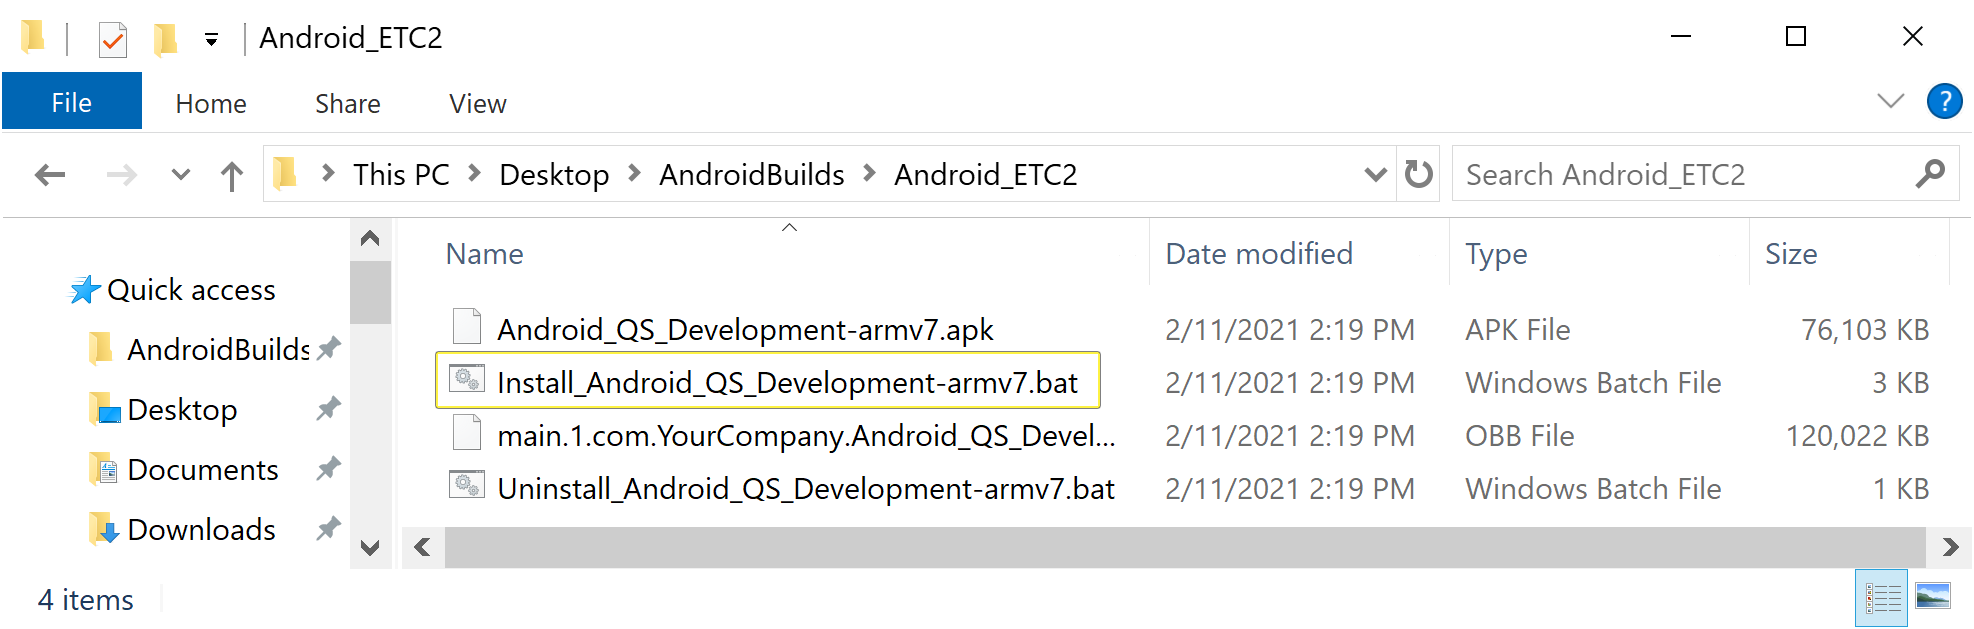 what is the file extension for mac that is equivelent to a .bat on windows?